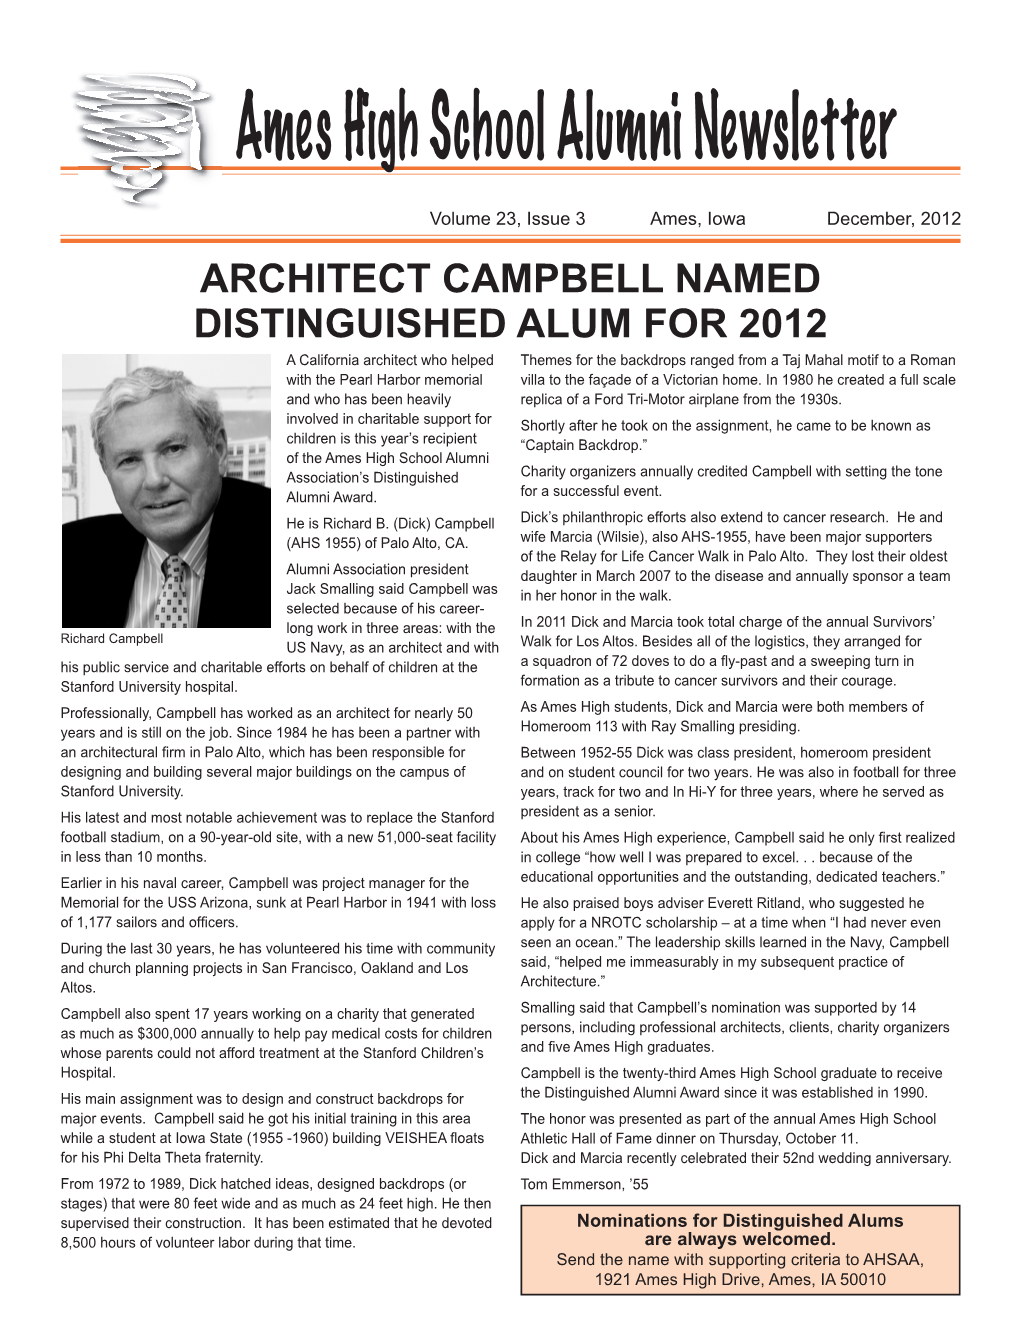 Architect Campbell Named Distinguished Alum for 2012